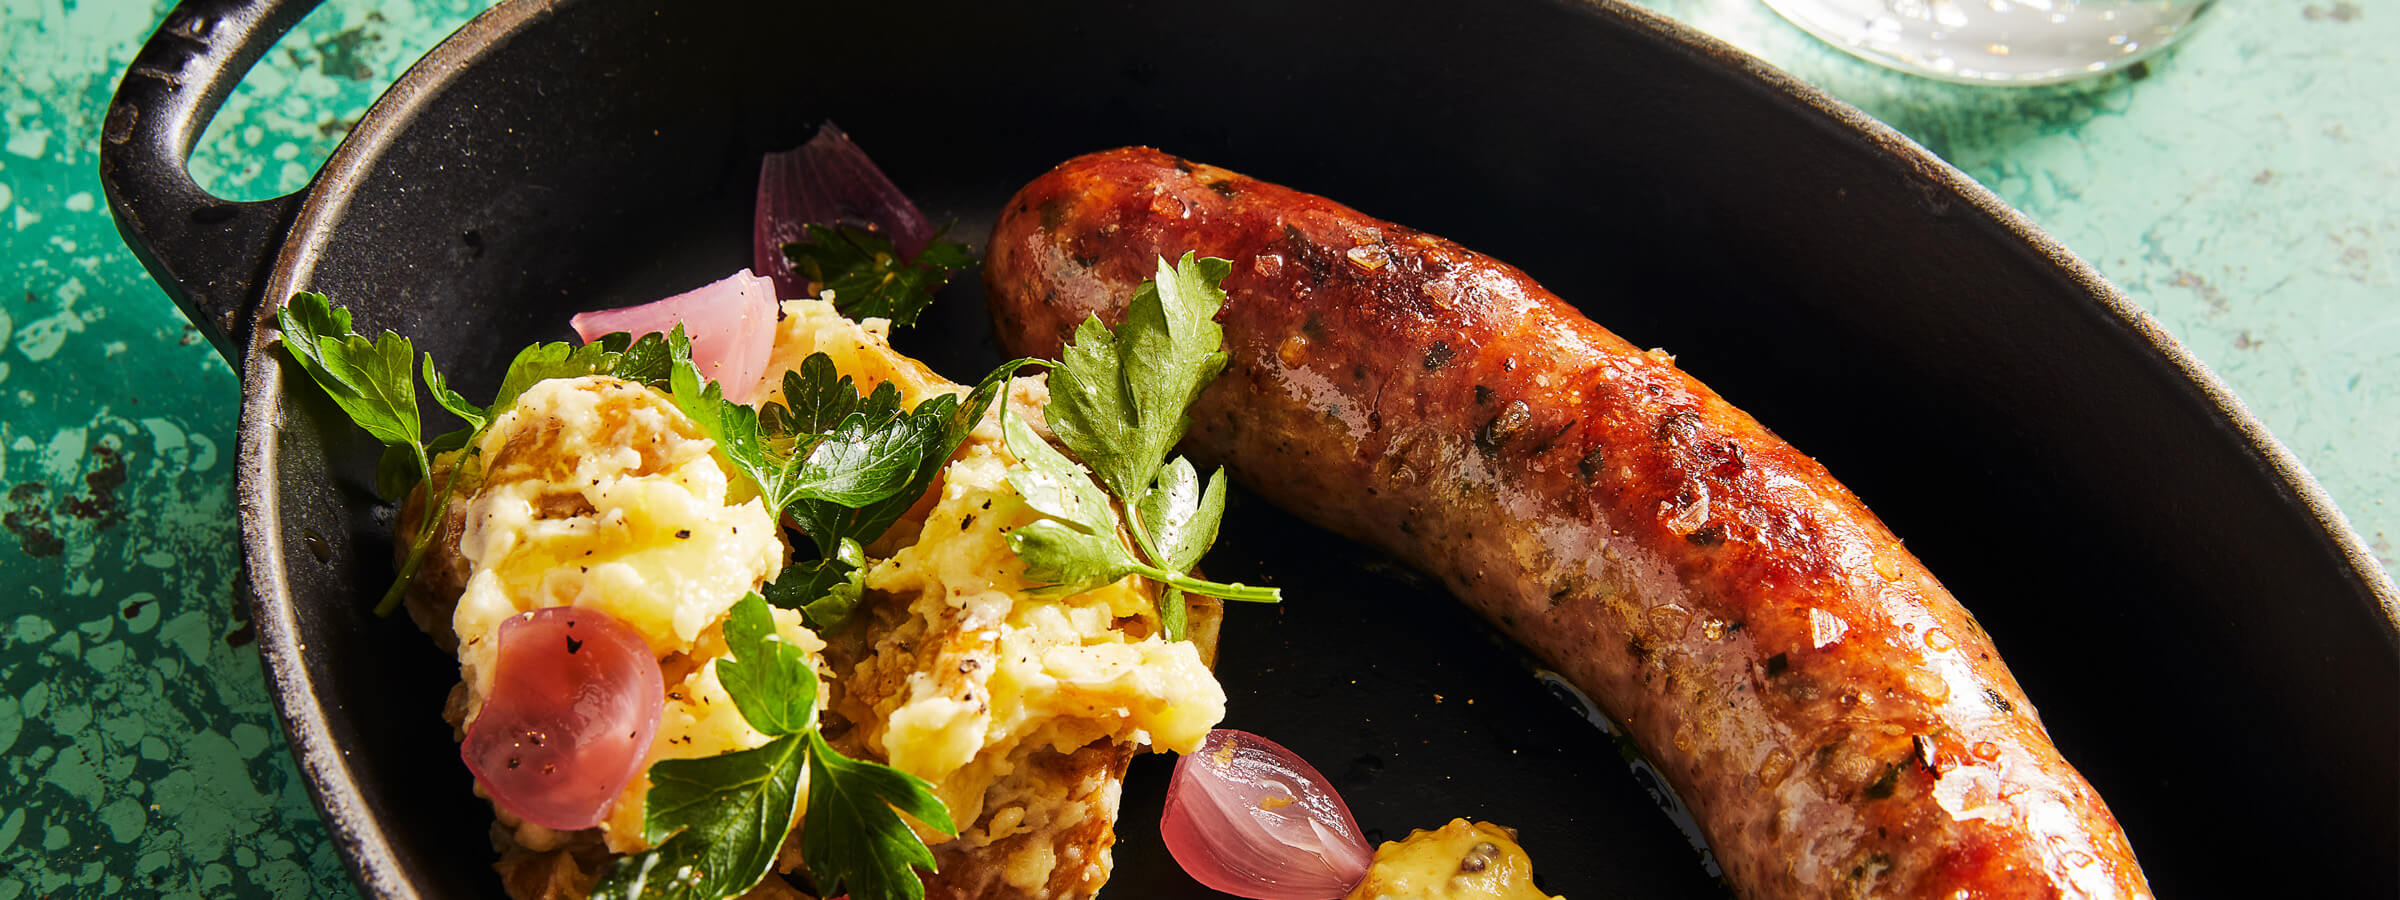 Italian Sausage from Chef Willits at Abernethys - desktop version